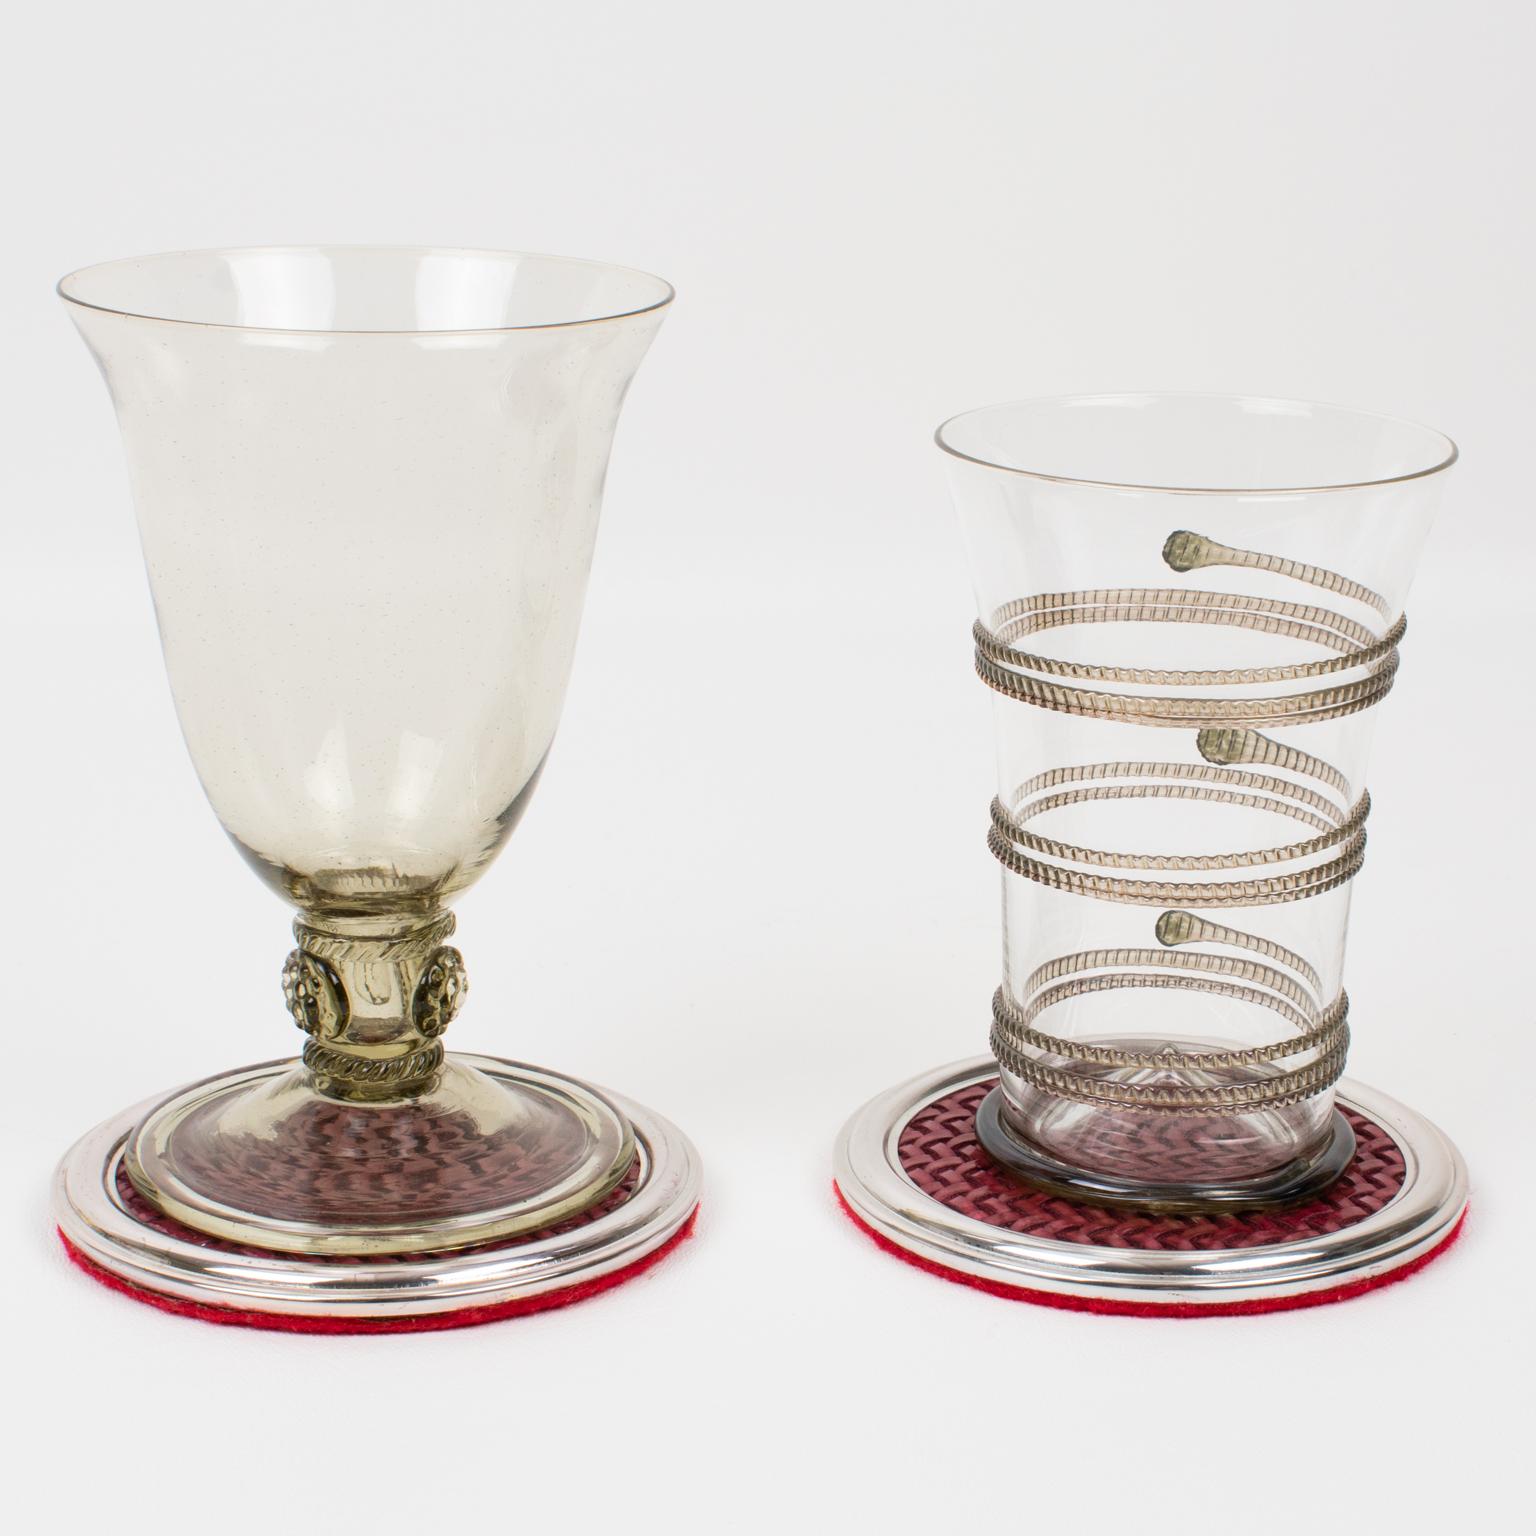 Mid-Century Silver Plate and Red Leather Coasters Set, Italy 1960s For Sale 3